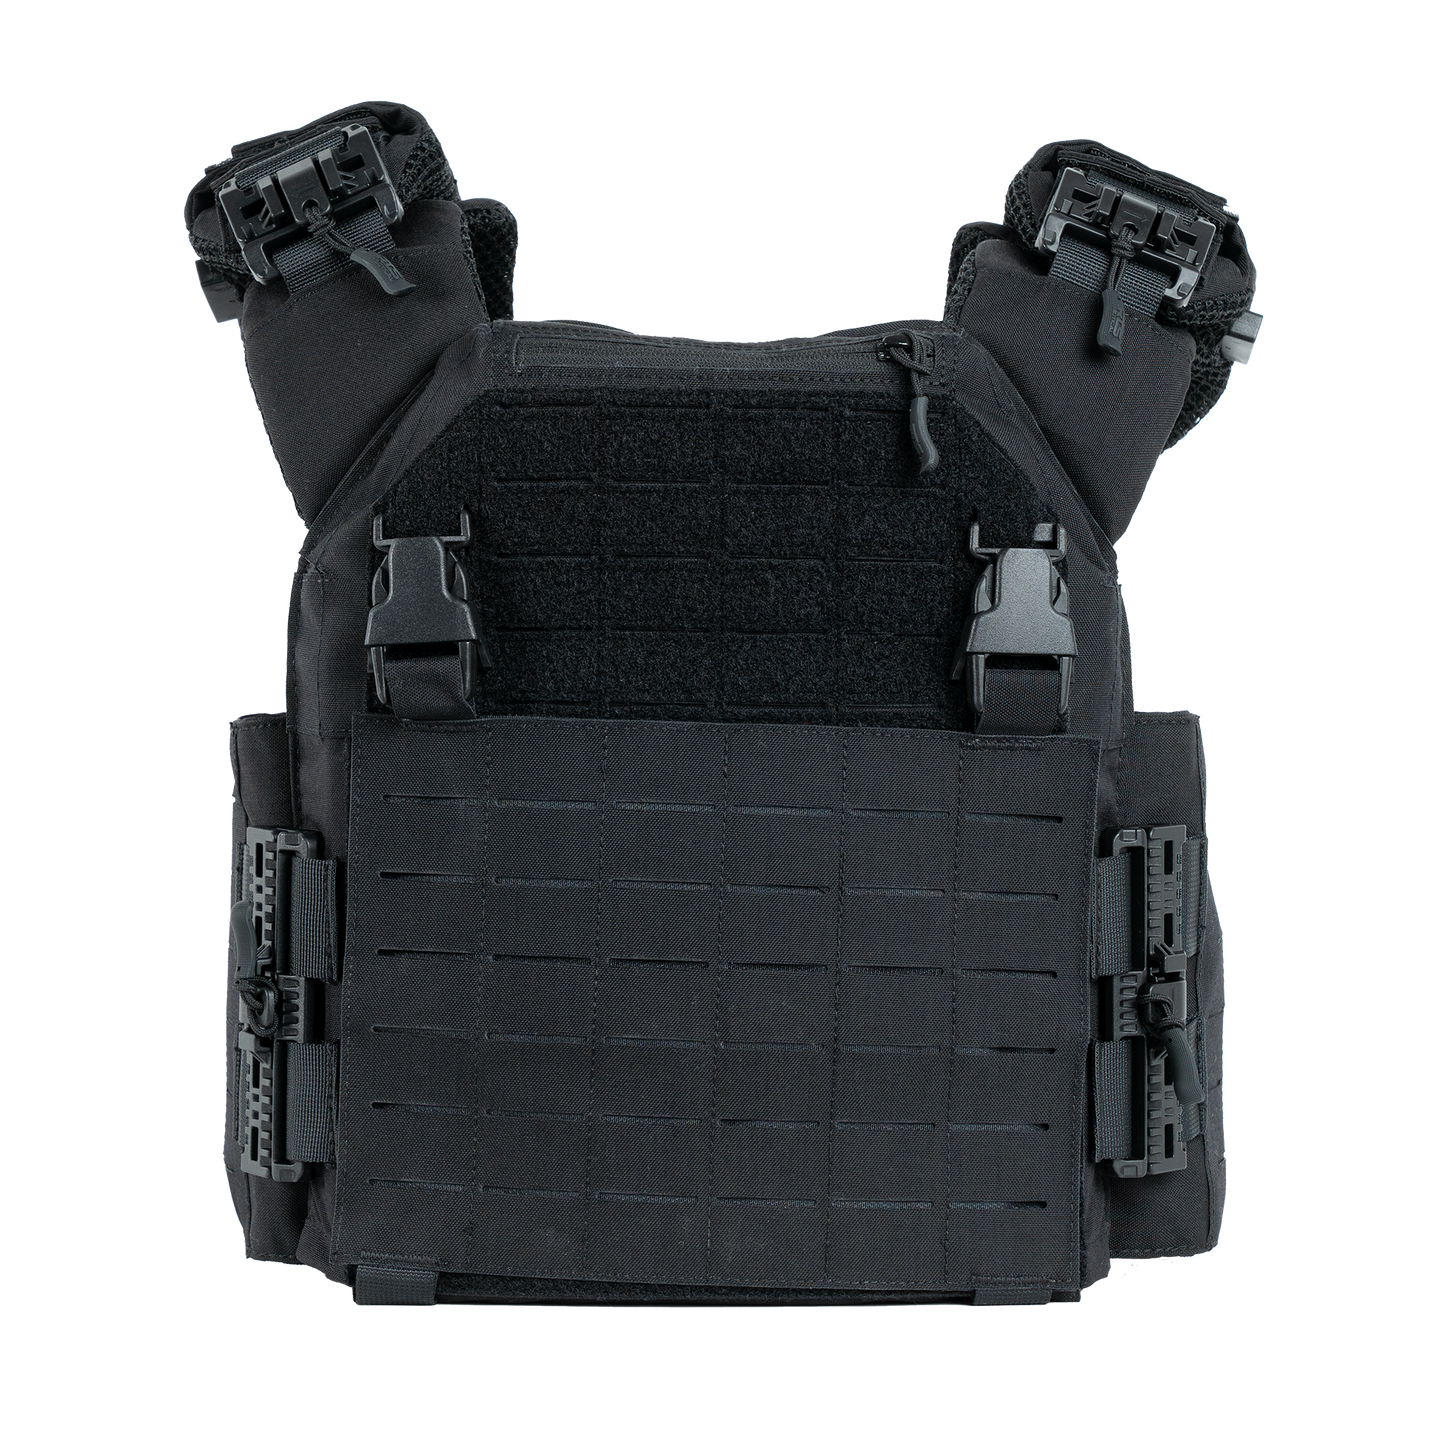 RTS Tactical Level IIIA FX770 Soft Armor OPSEC Active Shooter Kit